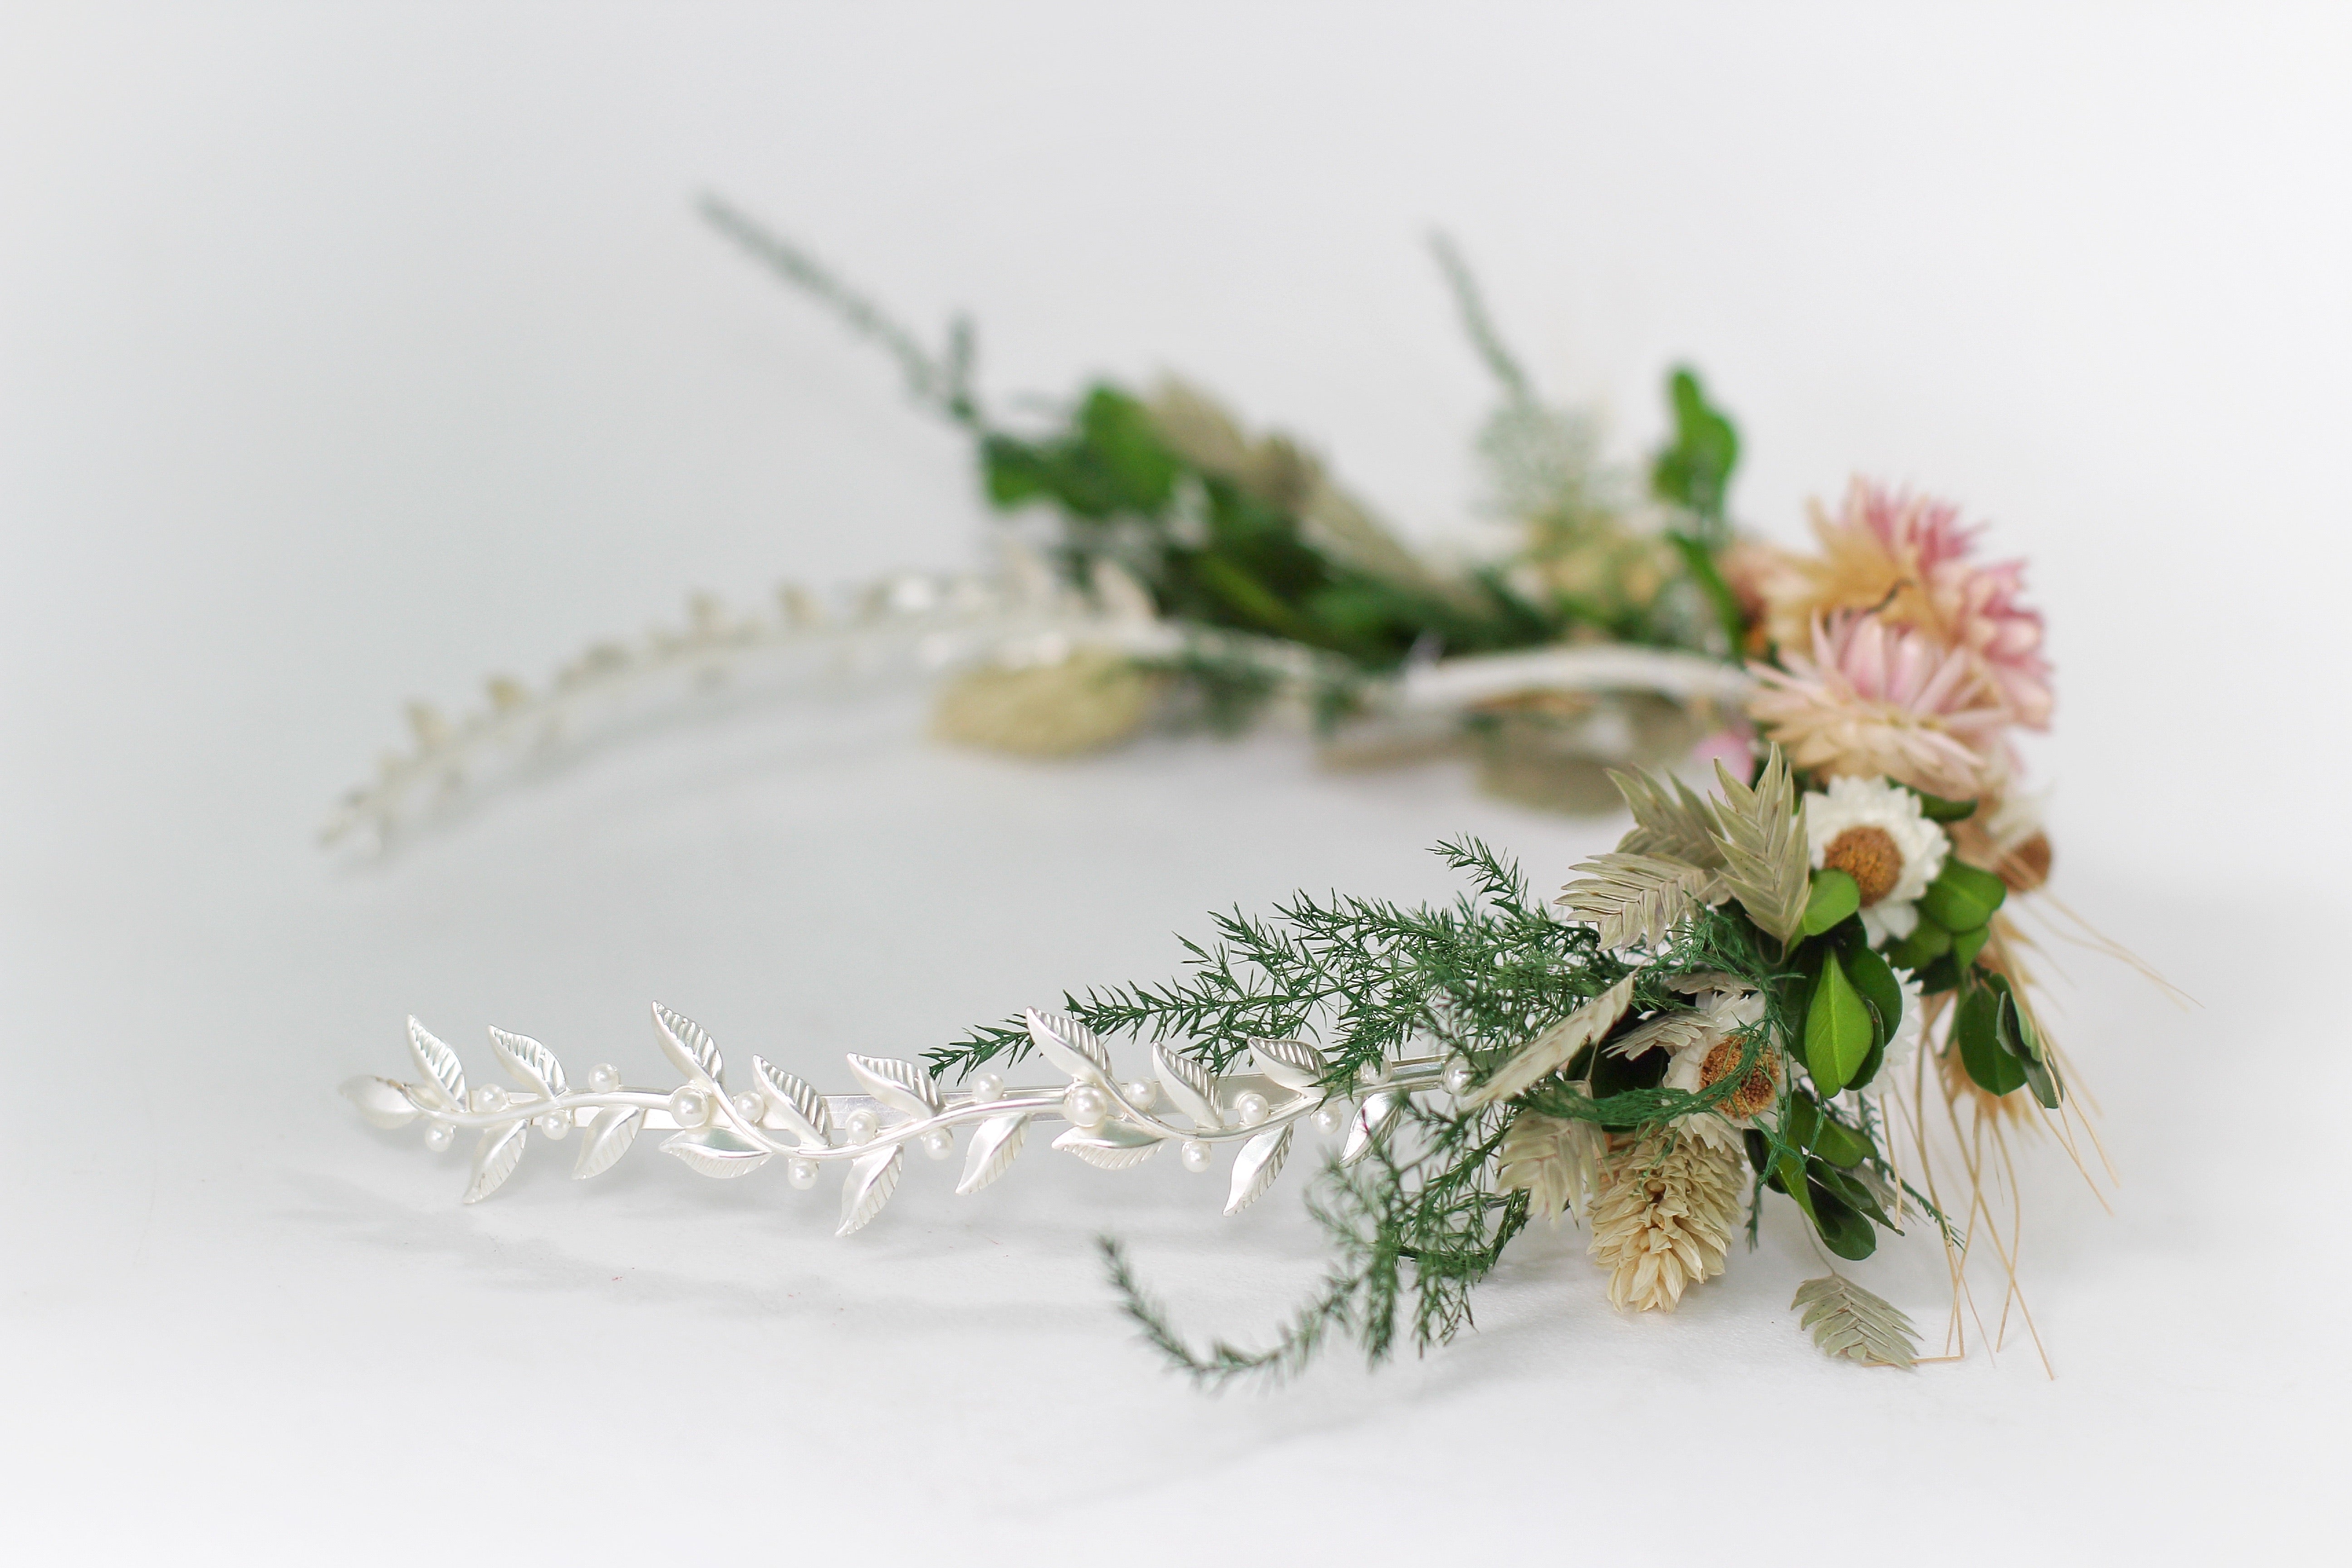 Preorder * Twigs & Pearls Goddess Crown With Dried Flowers